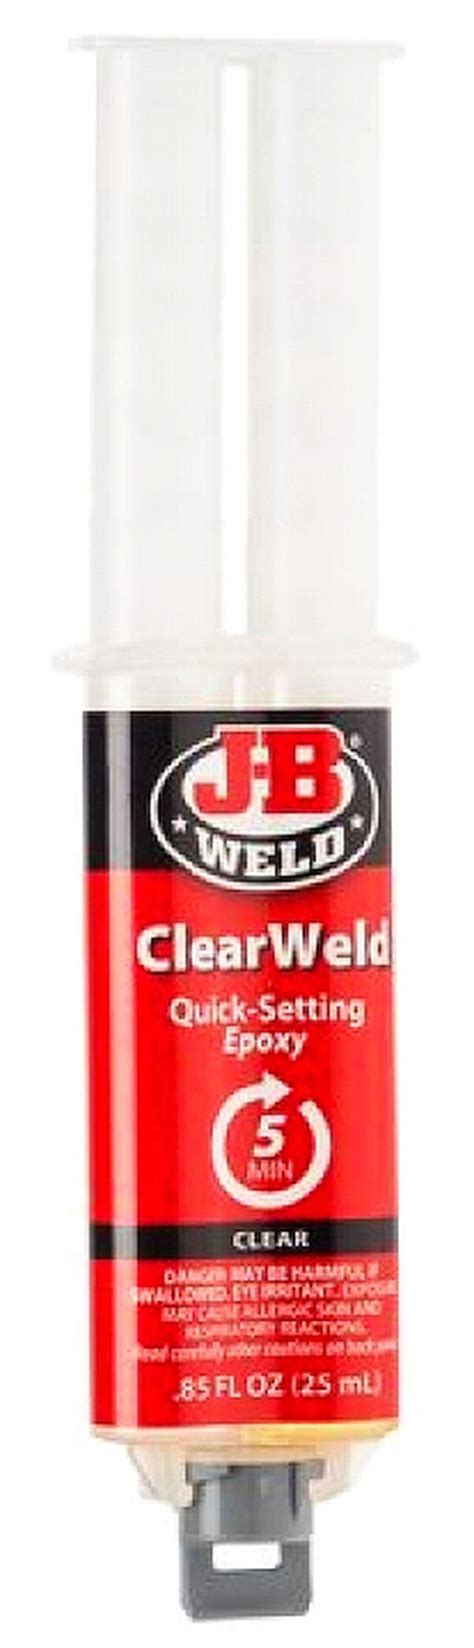 J B Weld Clearweld Quick Setting Clear Two Part Syringe Epoxy Etsy